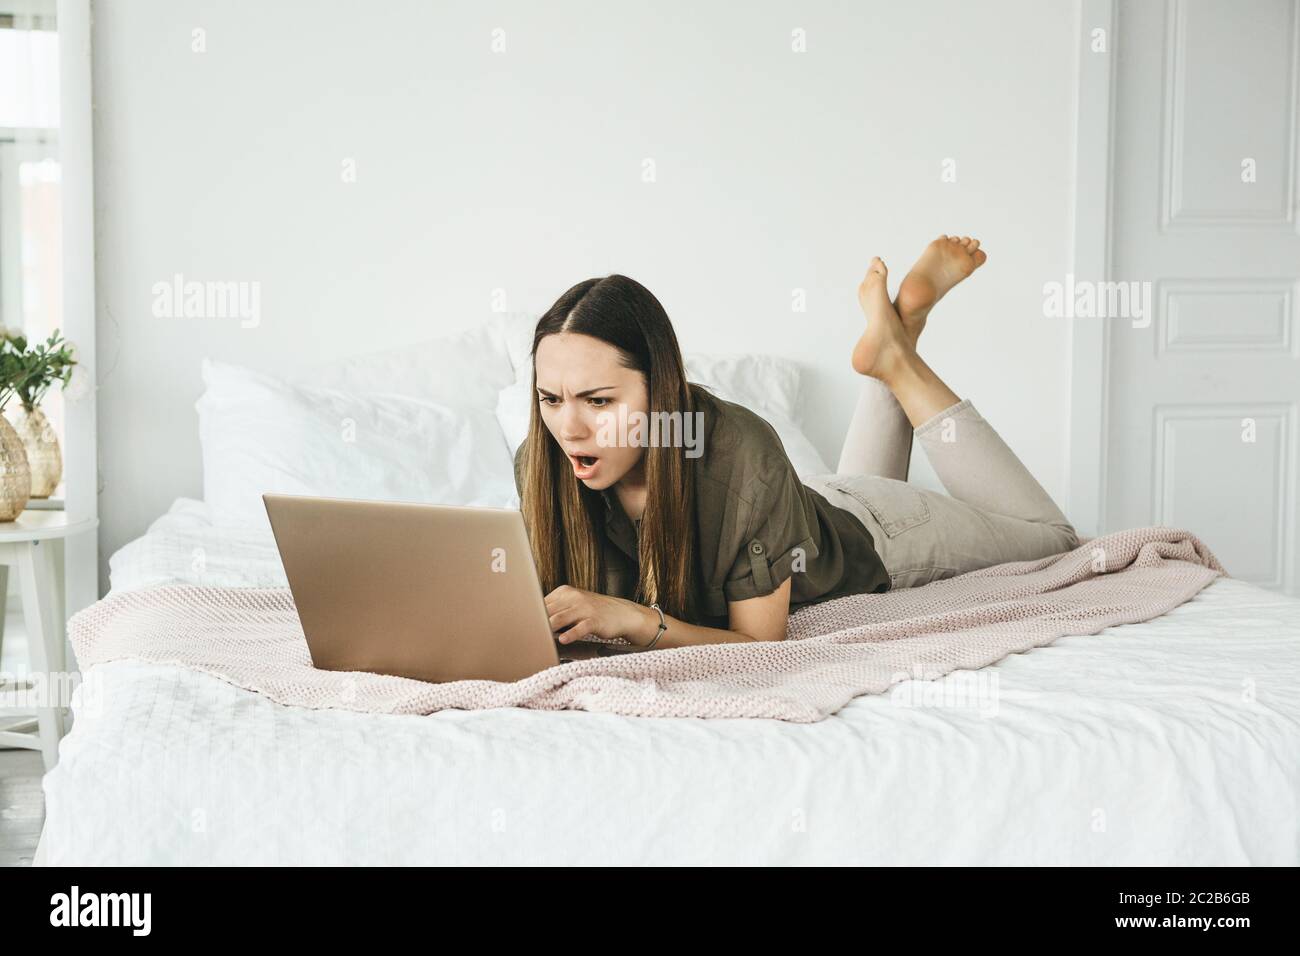 The girl uses a laptop at home. She saw information or news and was unpleasantly surprised or angry or upset. Stock Photo